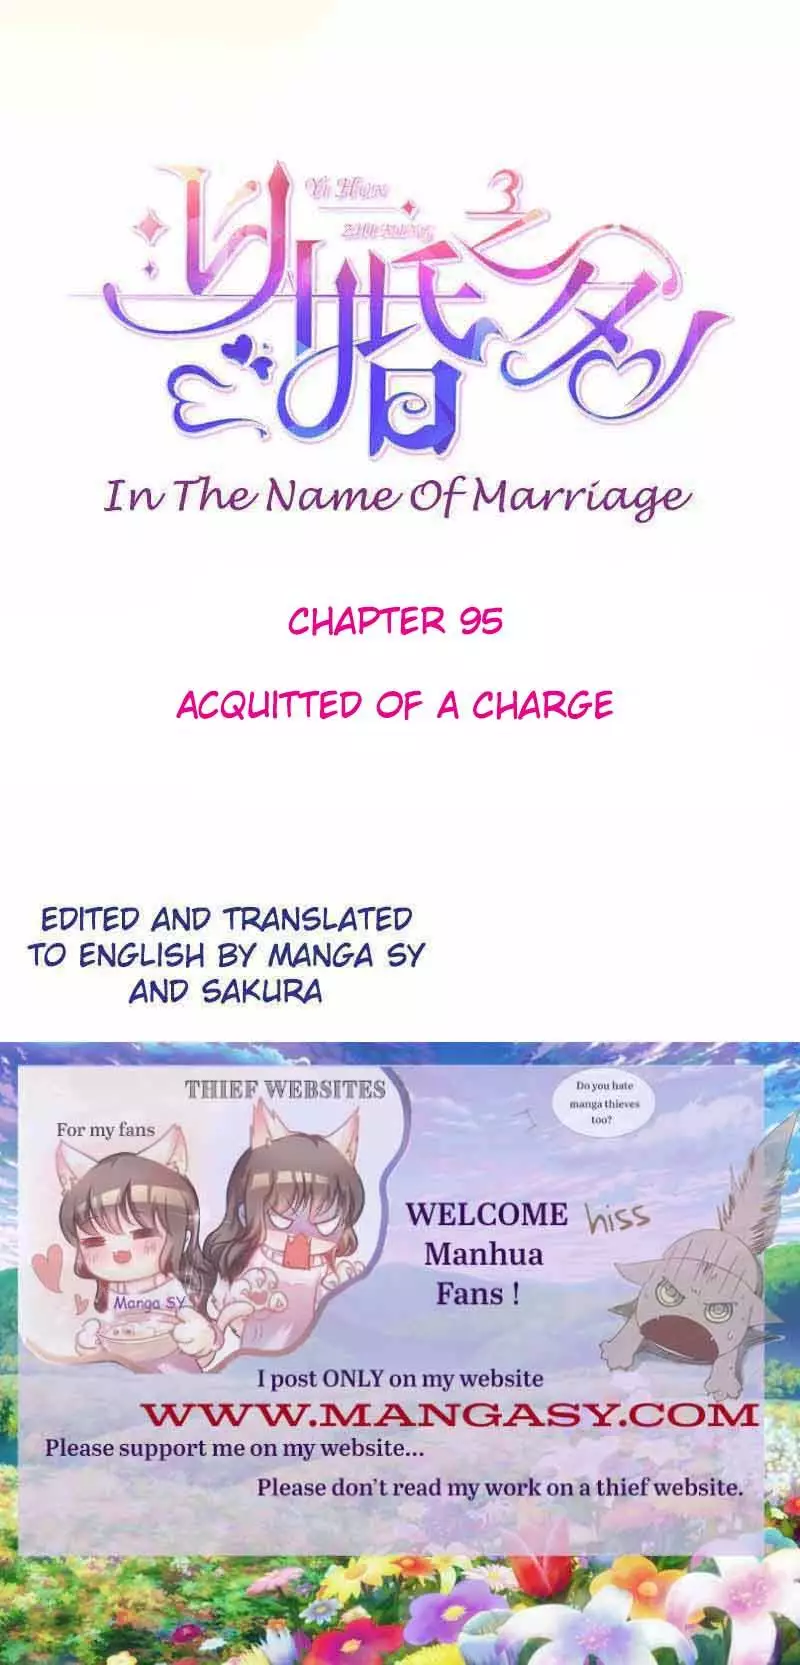 In The Name Of Marriage - 95 page 1-06e9db88